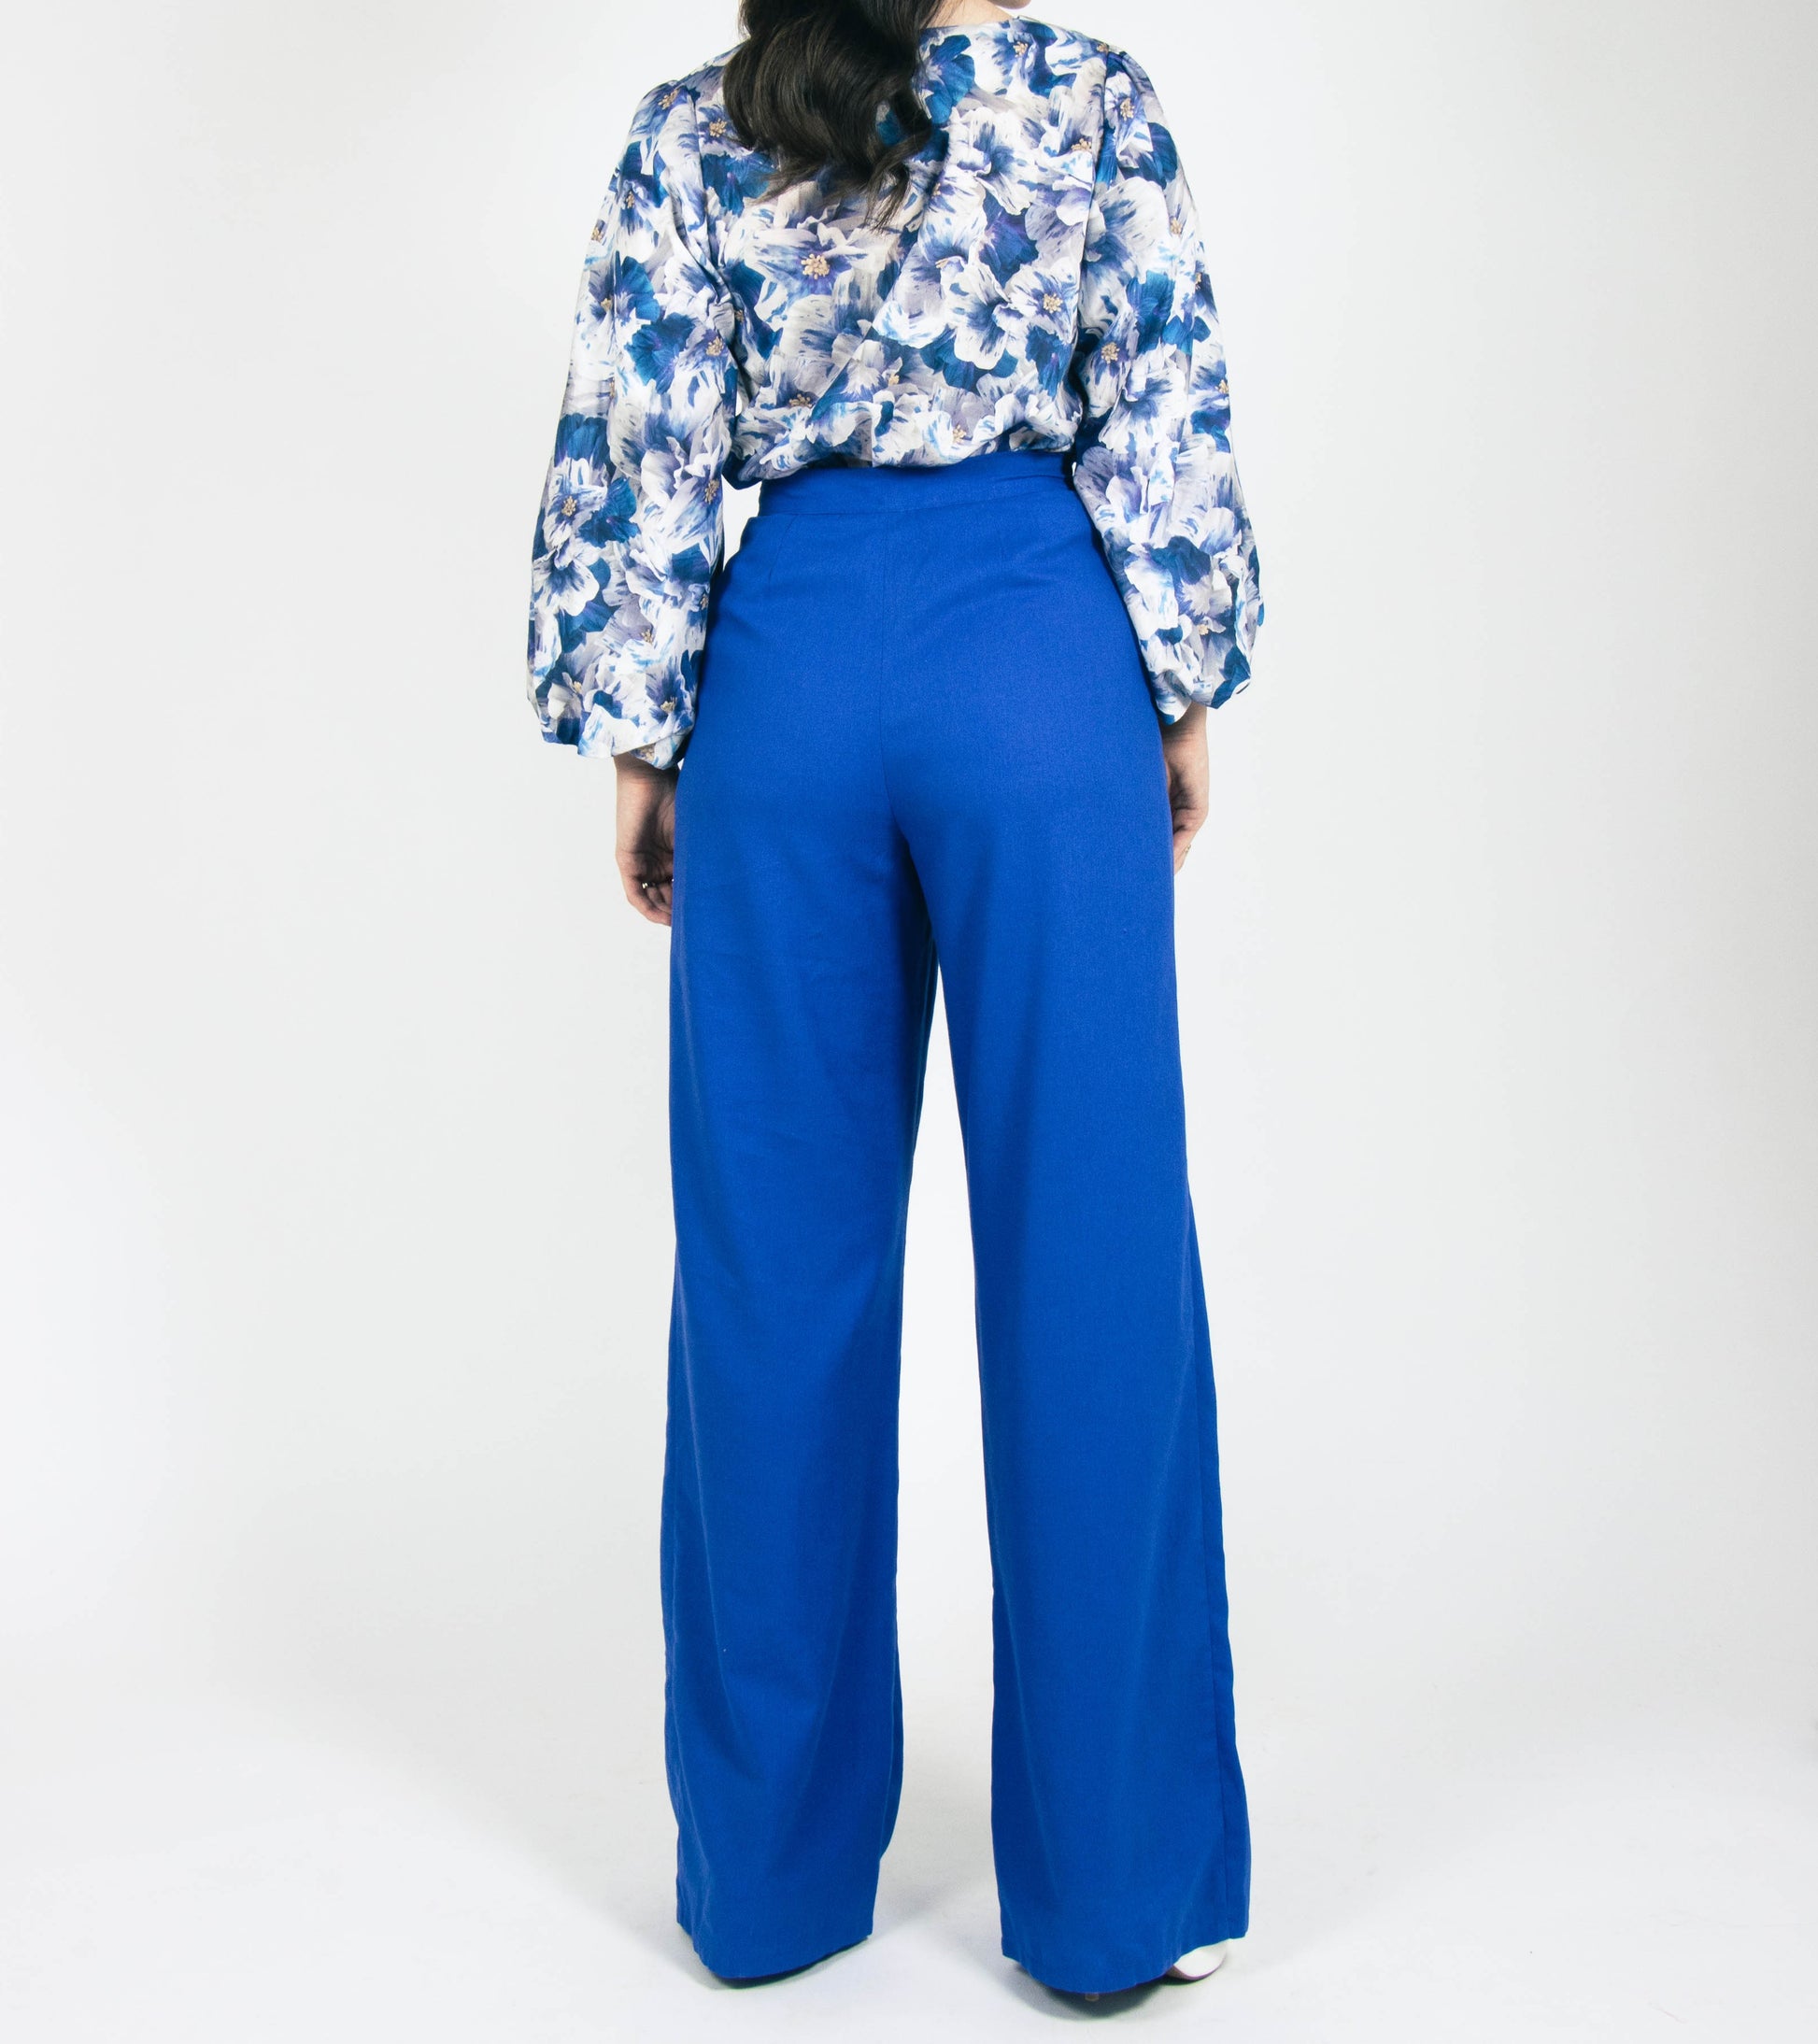 statement blue wide leg trousers womens fashion office wear outfit